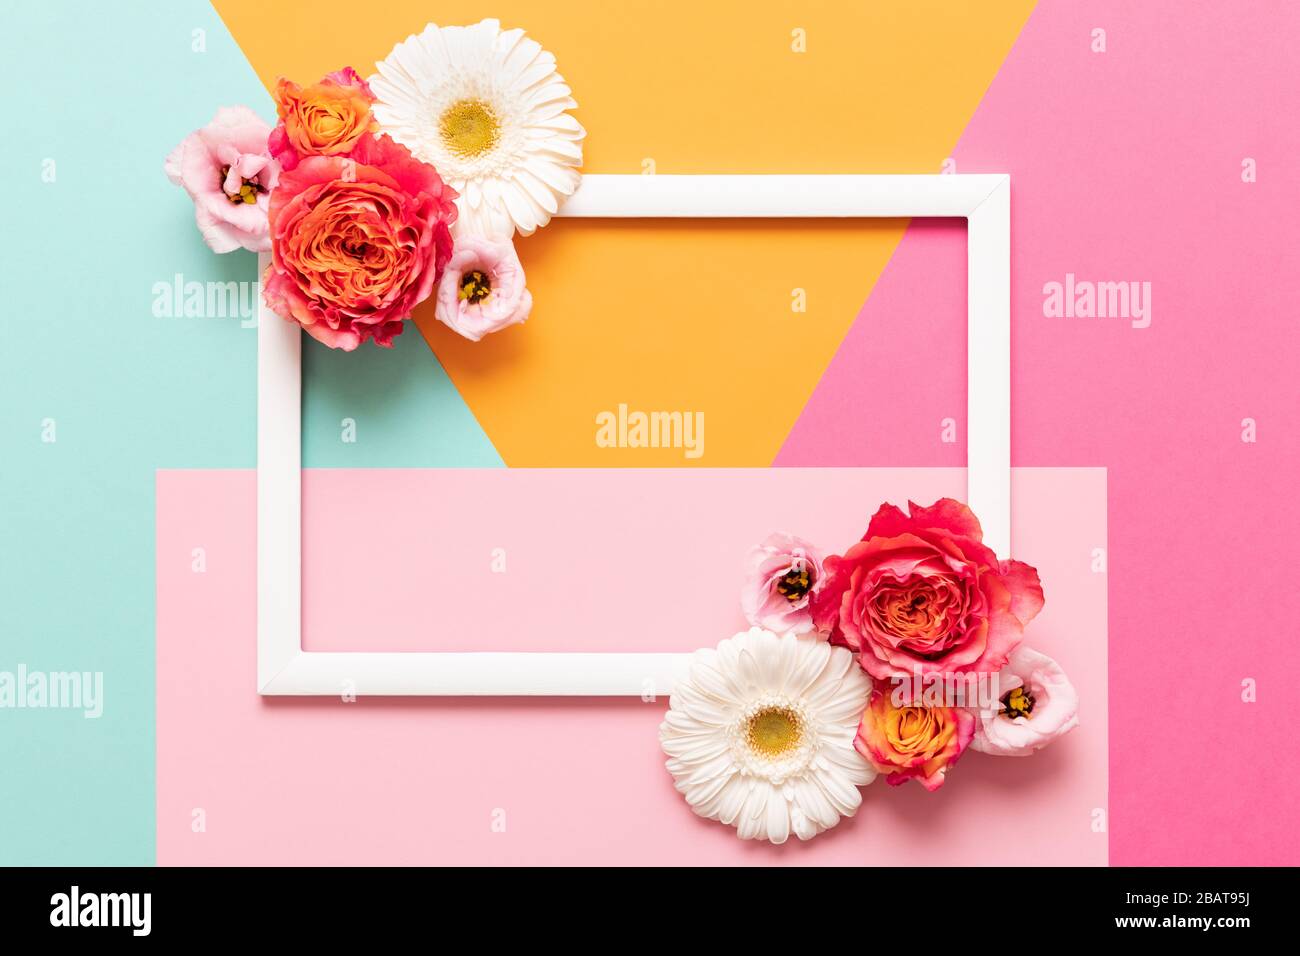 Happy Birthday Greeting Card Flowers Banque D Image Et Photos Alamy